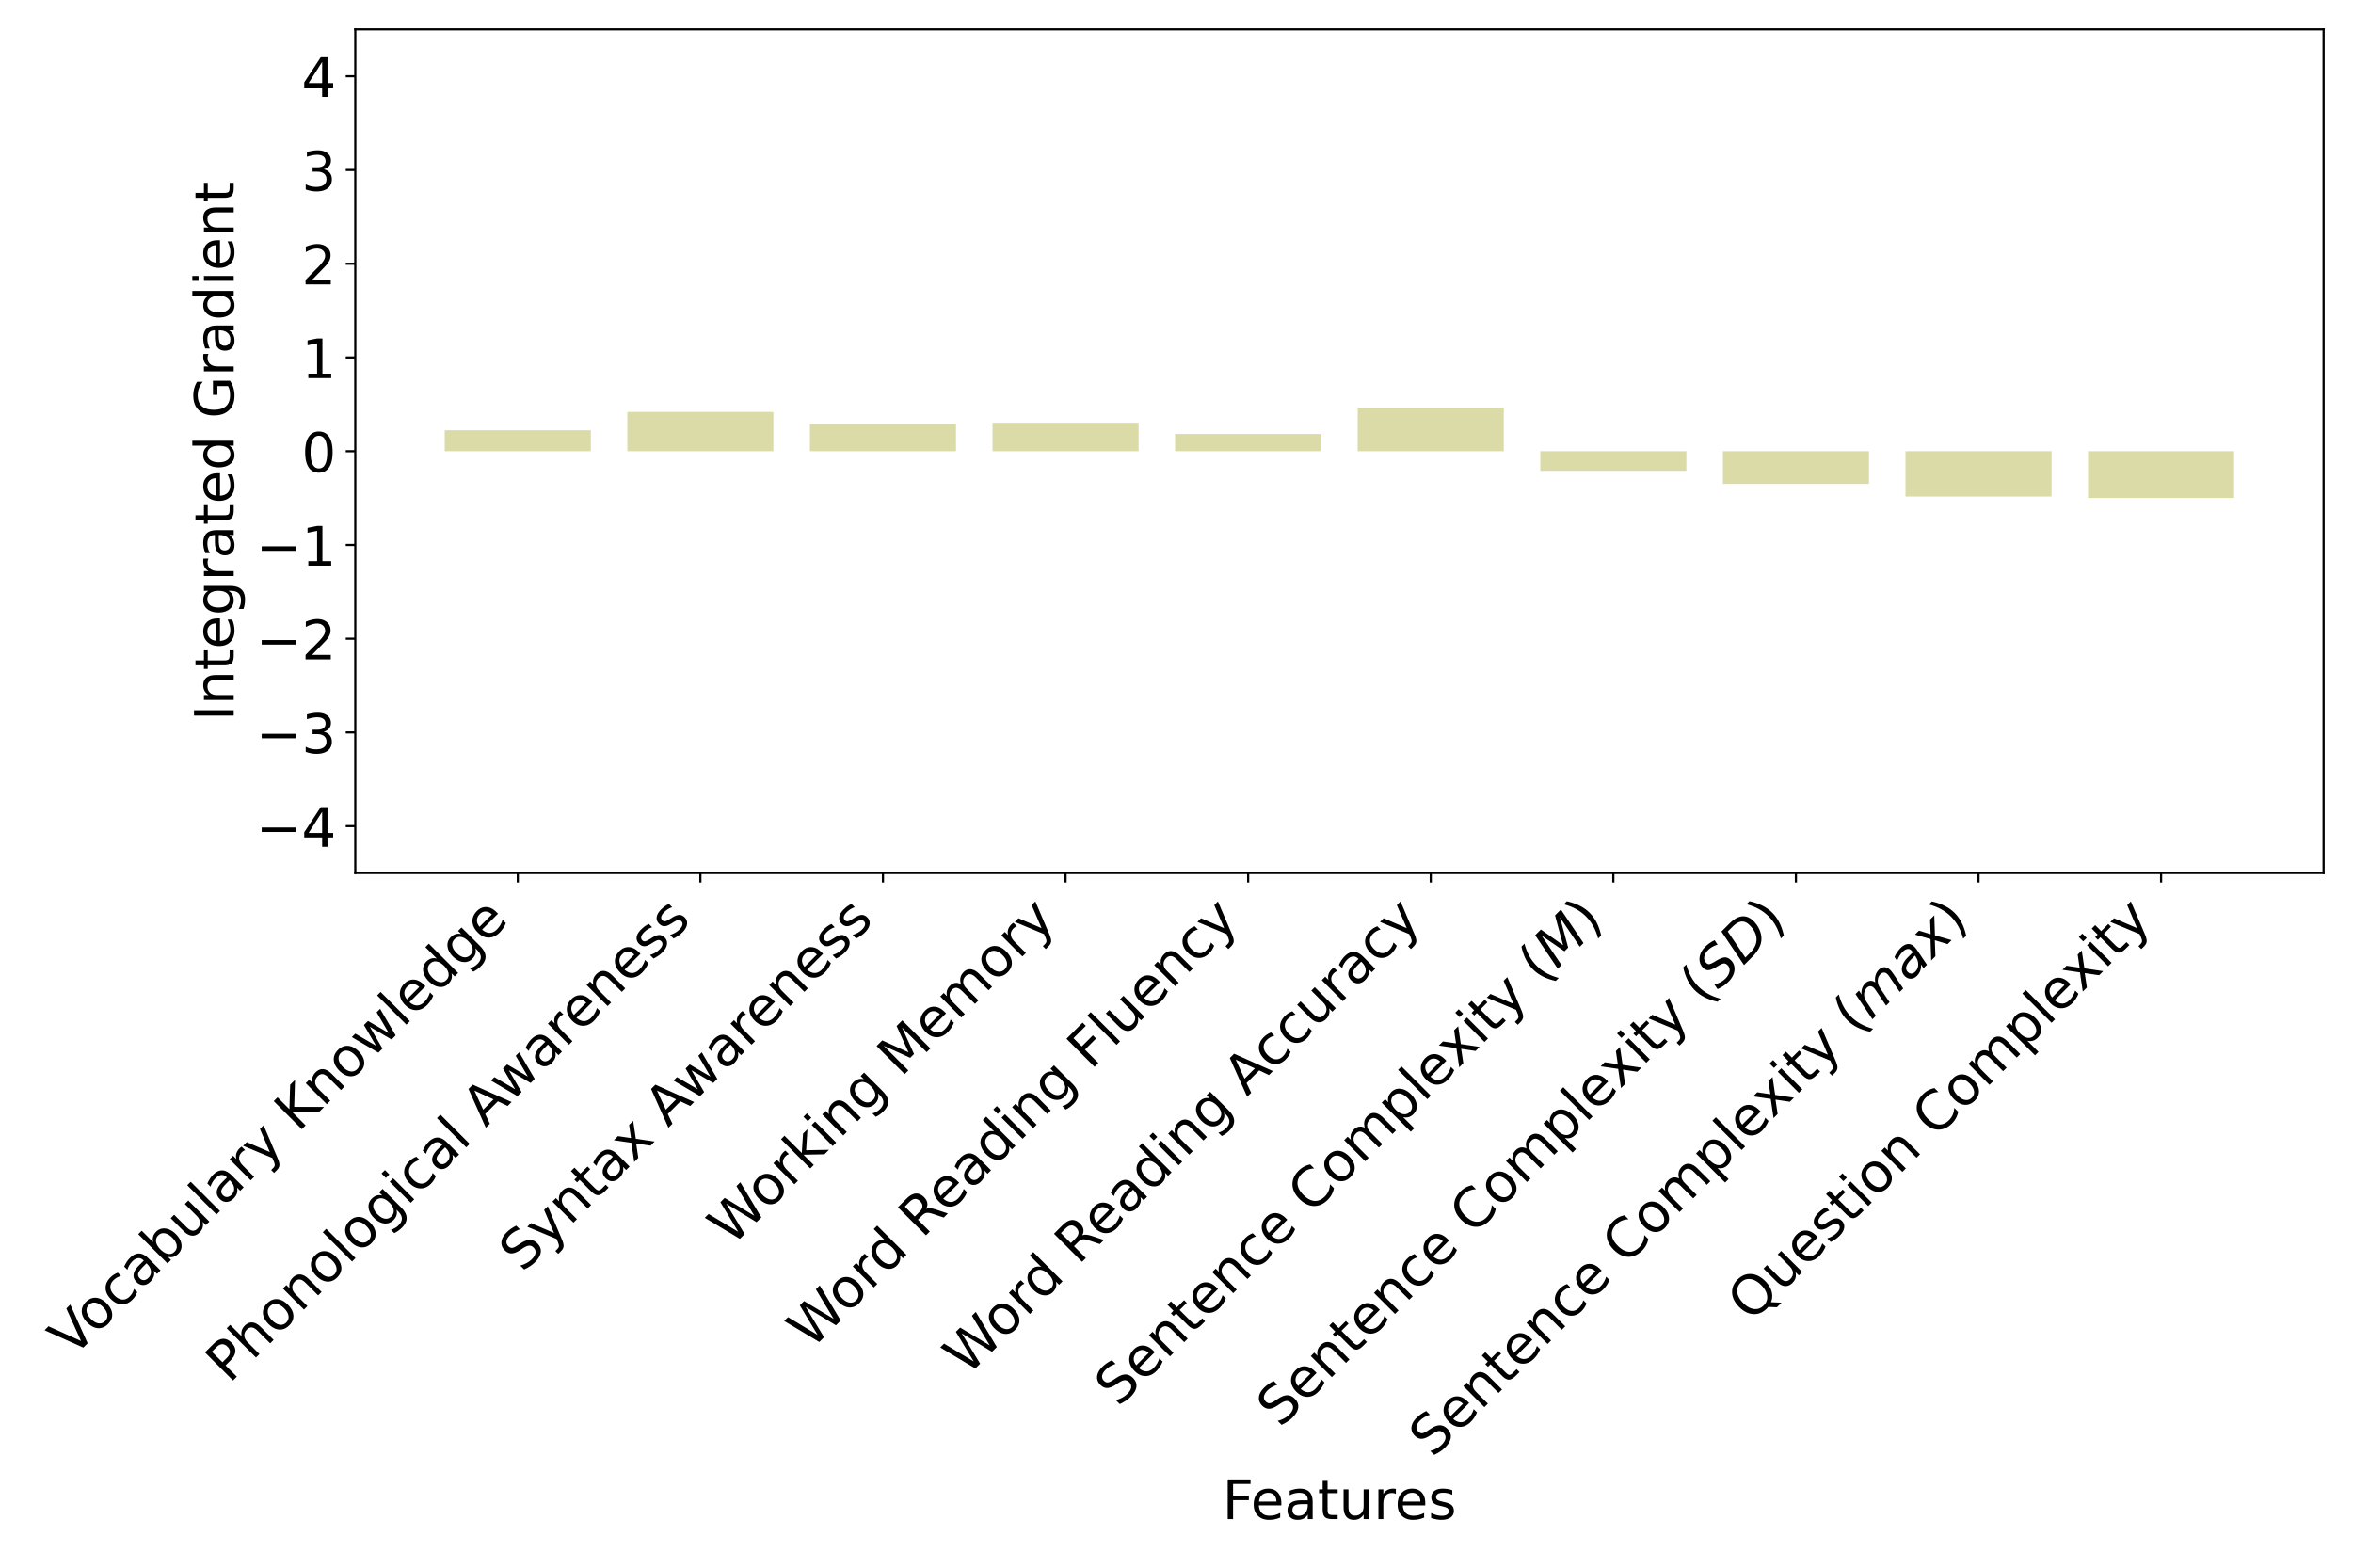 A bar chart showing integrated gradient value for each text feature in the base + sentence complexity model.